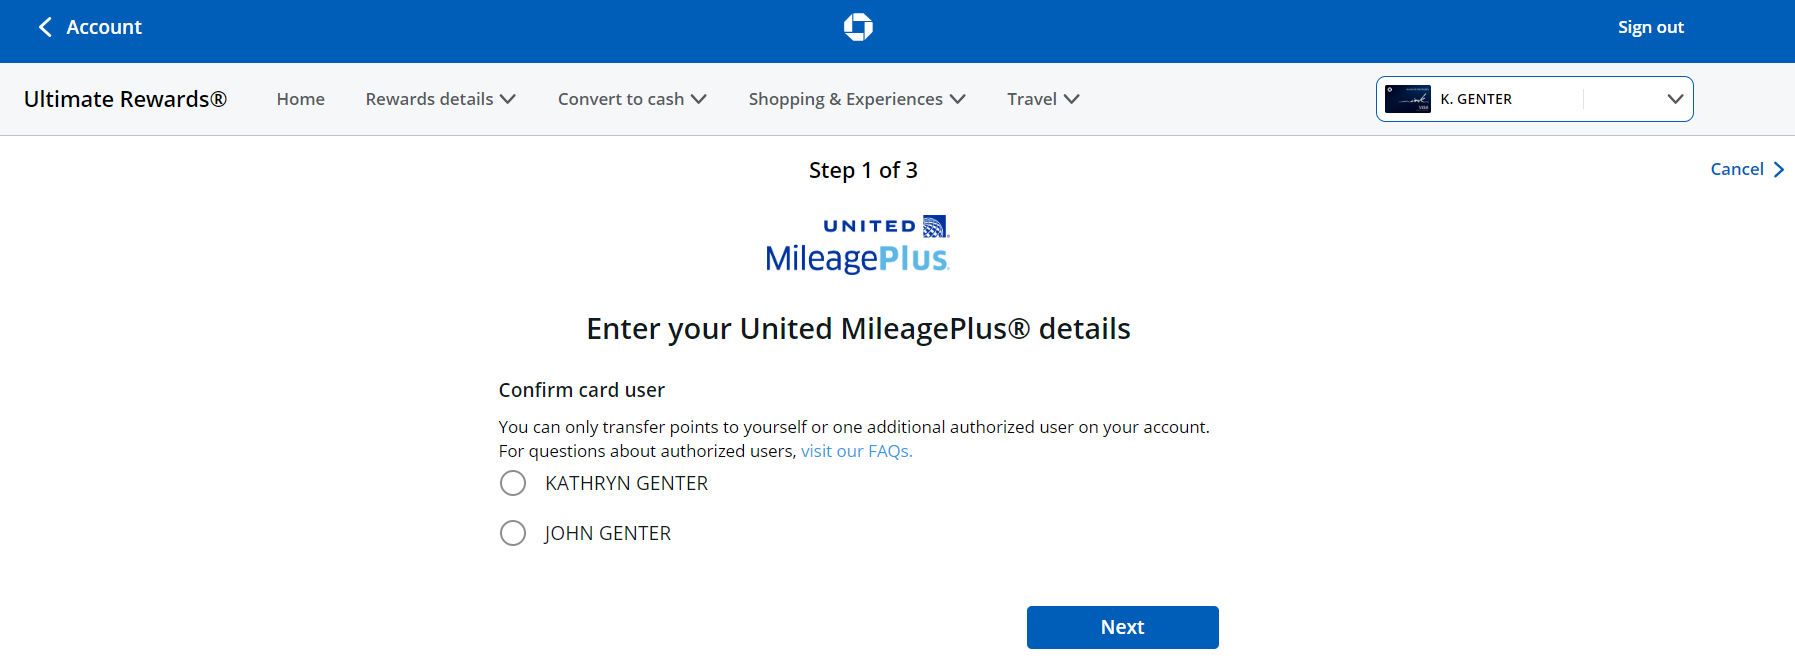 how to use chase travel points